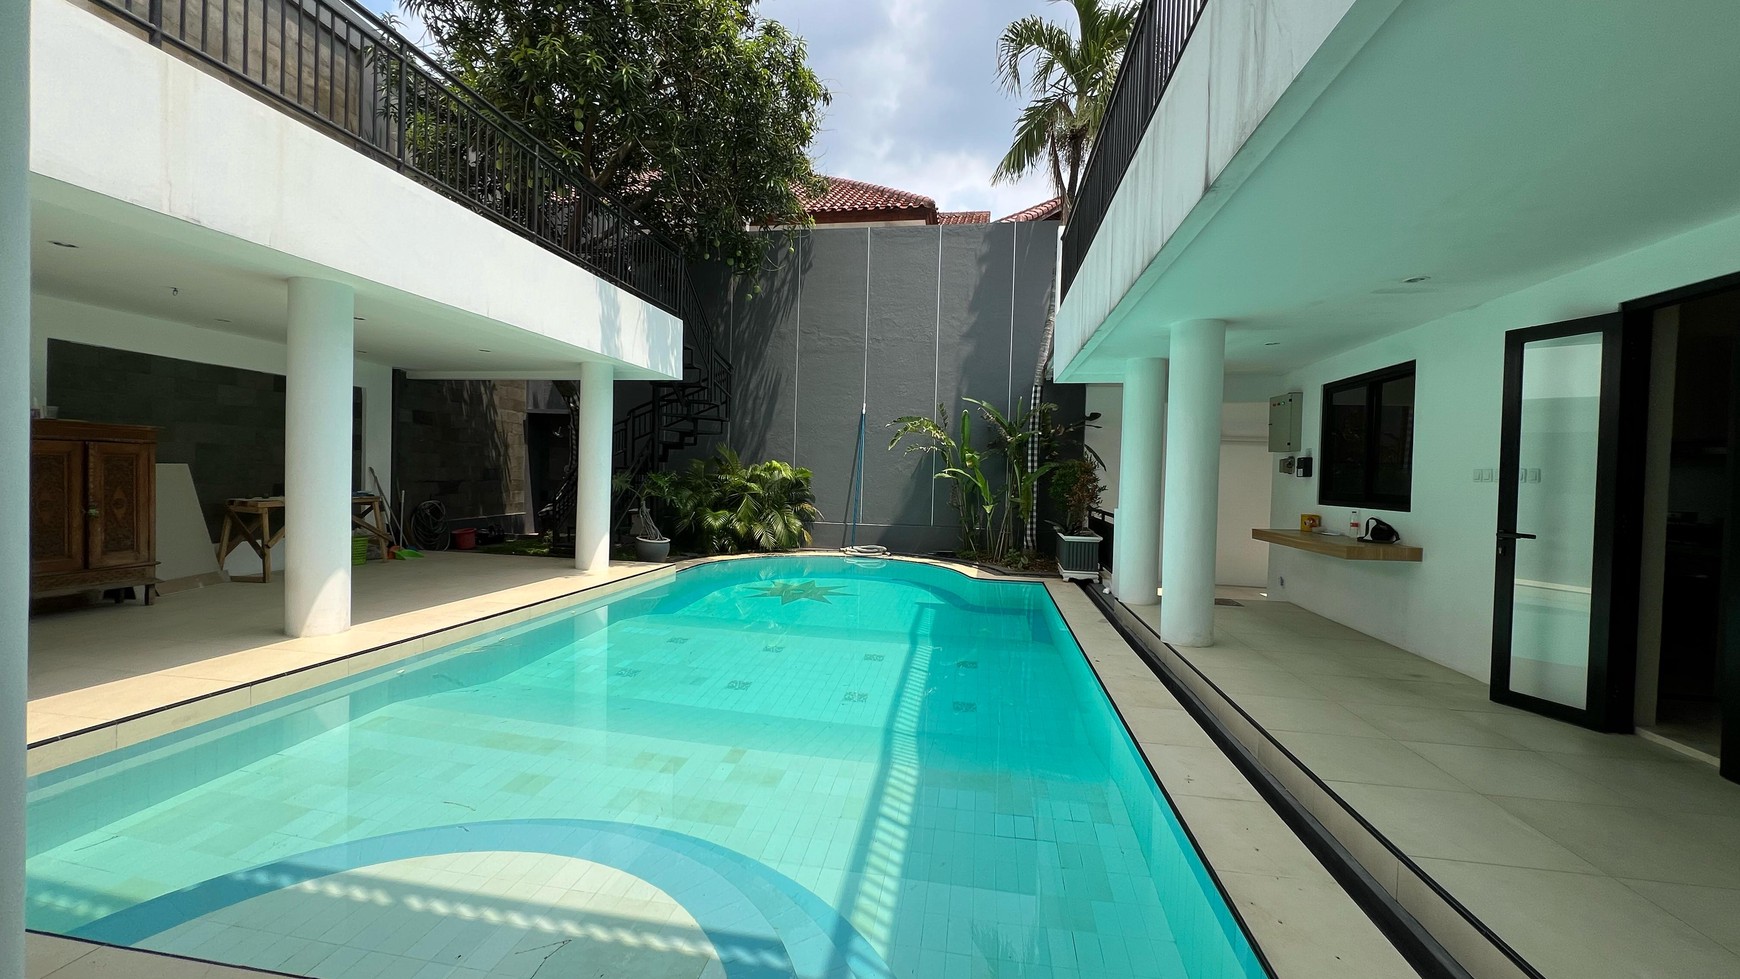 Newly Renovated bright house located cipete close to france school, mentari school, and kemang